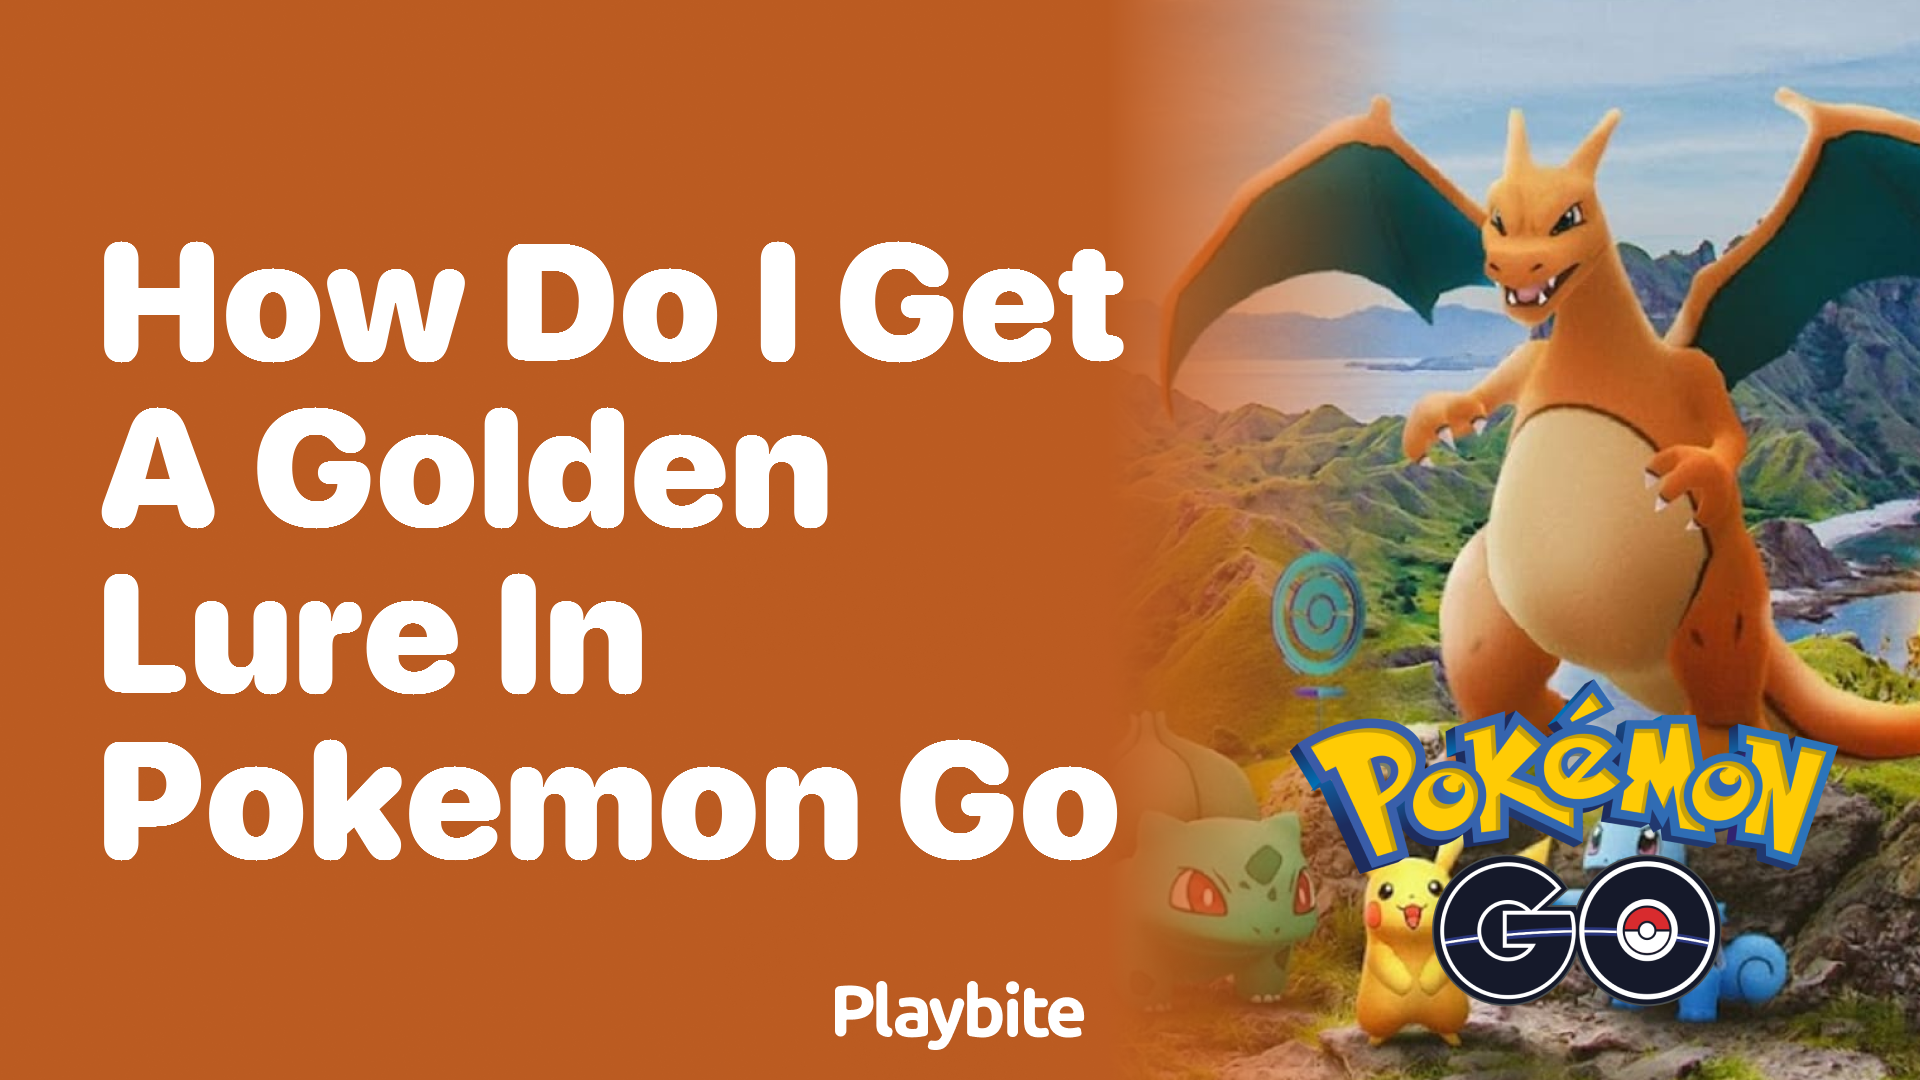 How Do I Get a Golden Lure in Pokemon GO? - Playbite